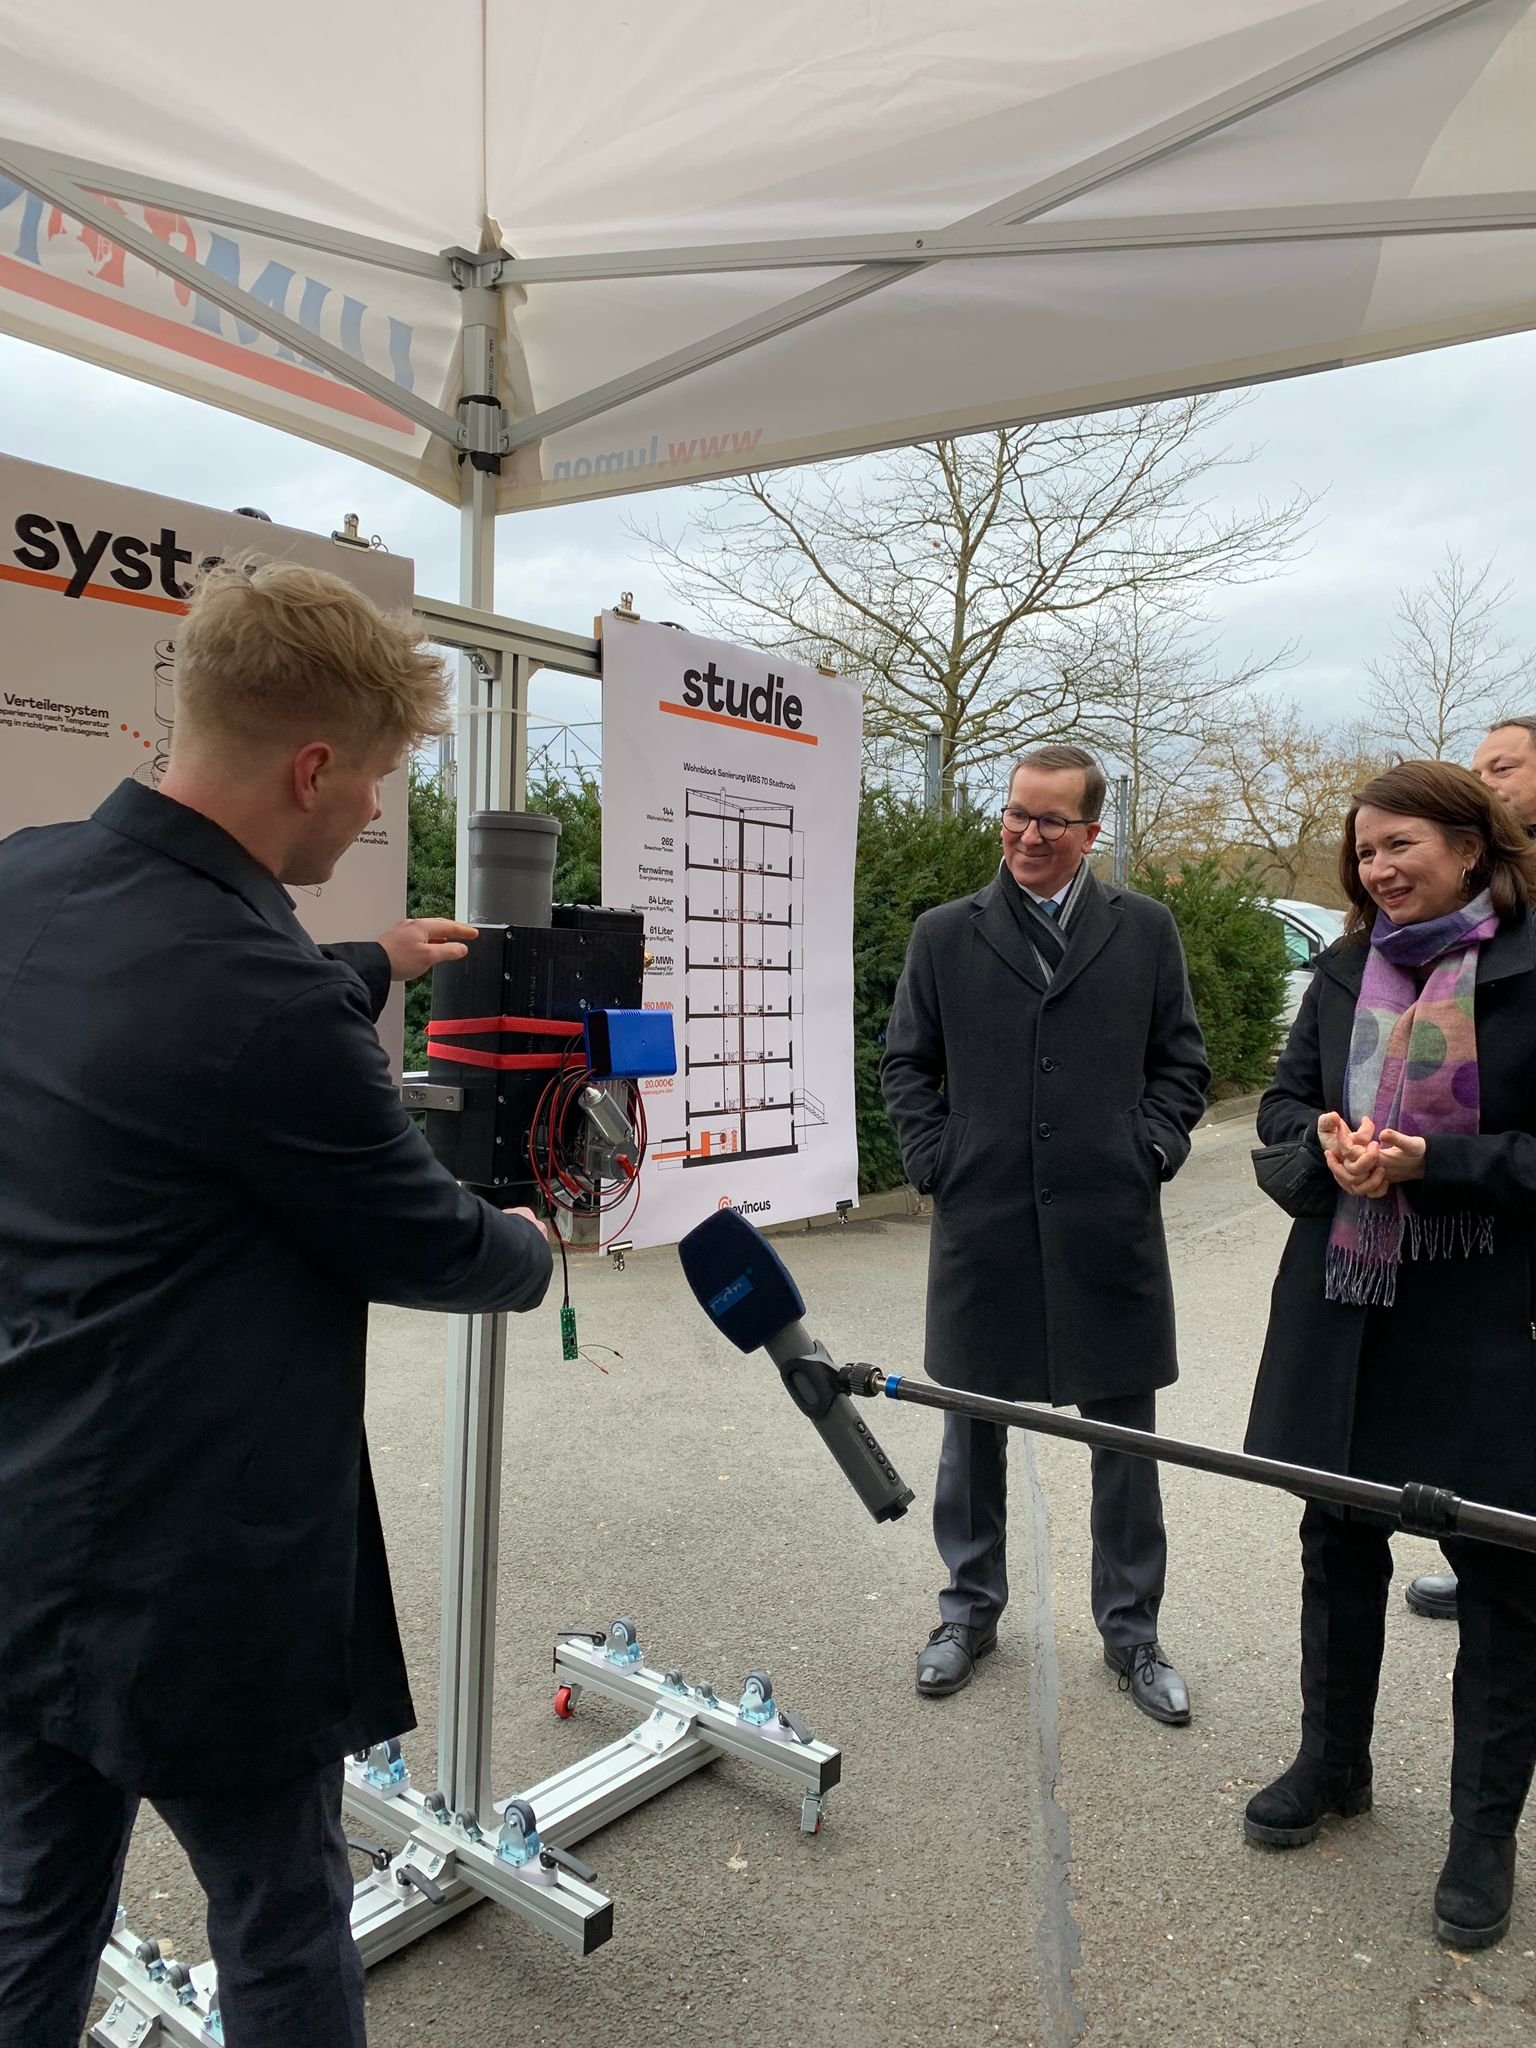 Thuringian Minister of Environment Anja Siegesmund and Felix Drechsel next to a sewage diverter from revincus